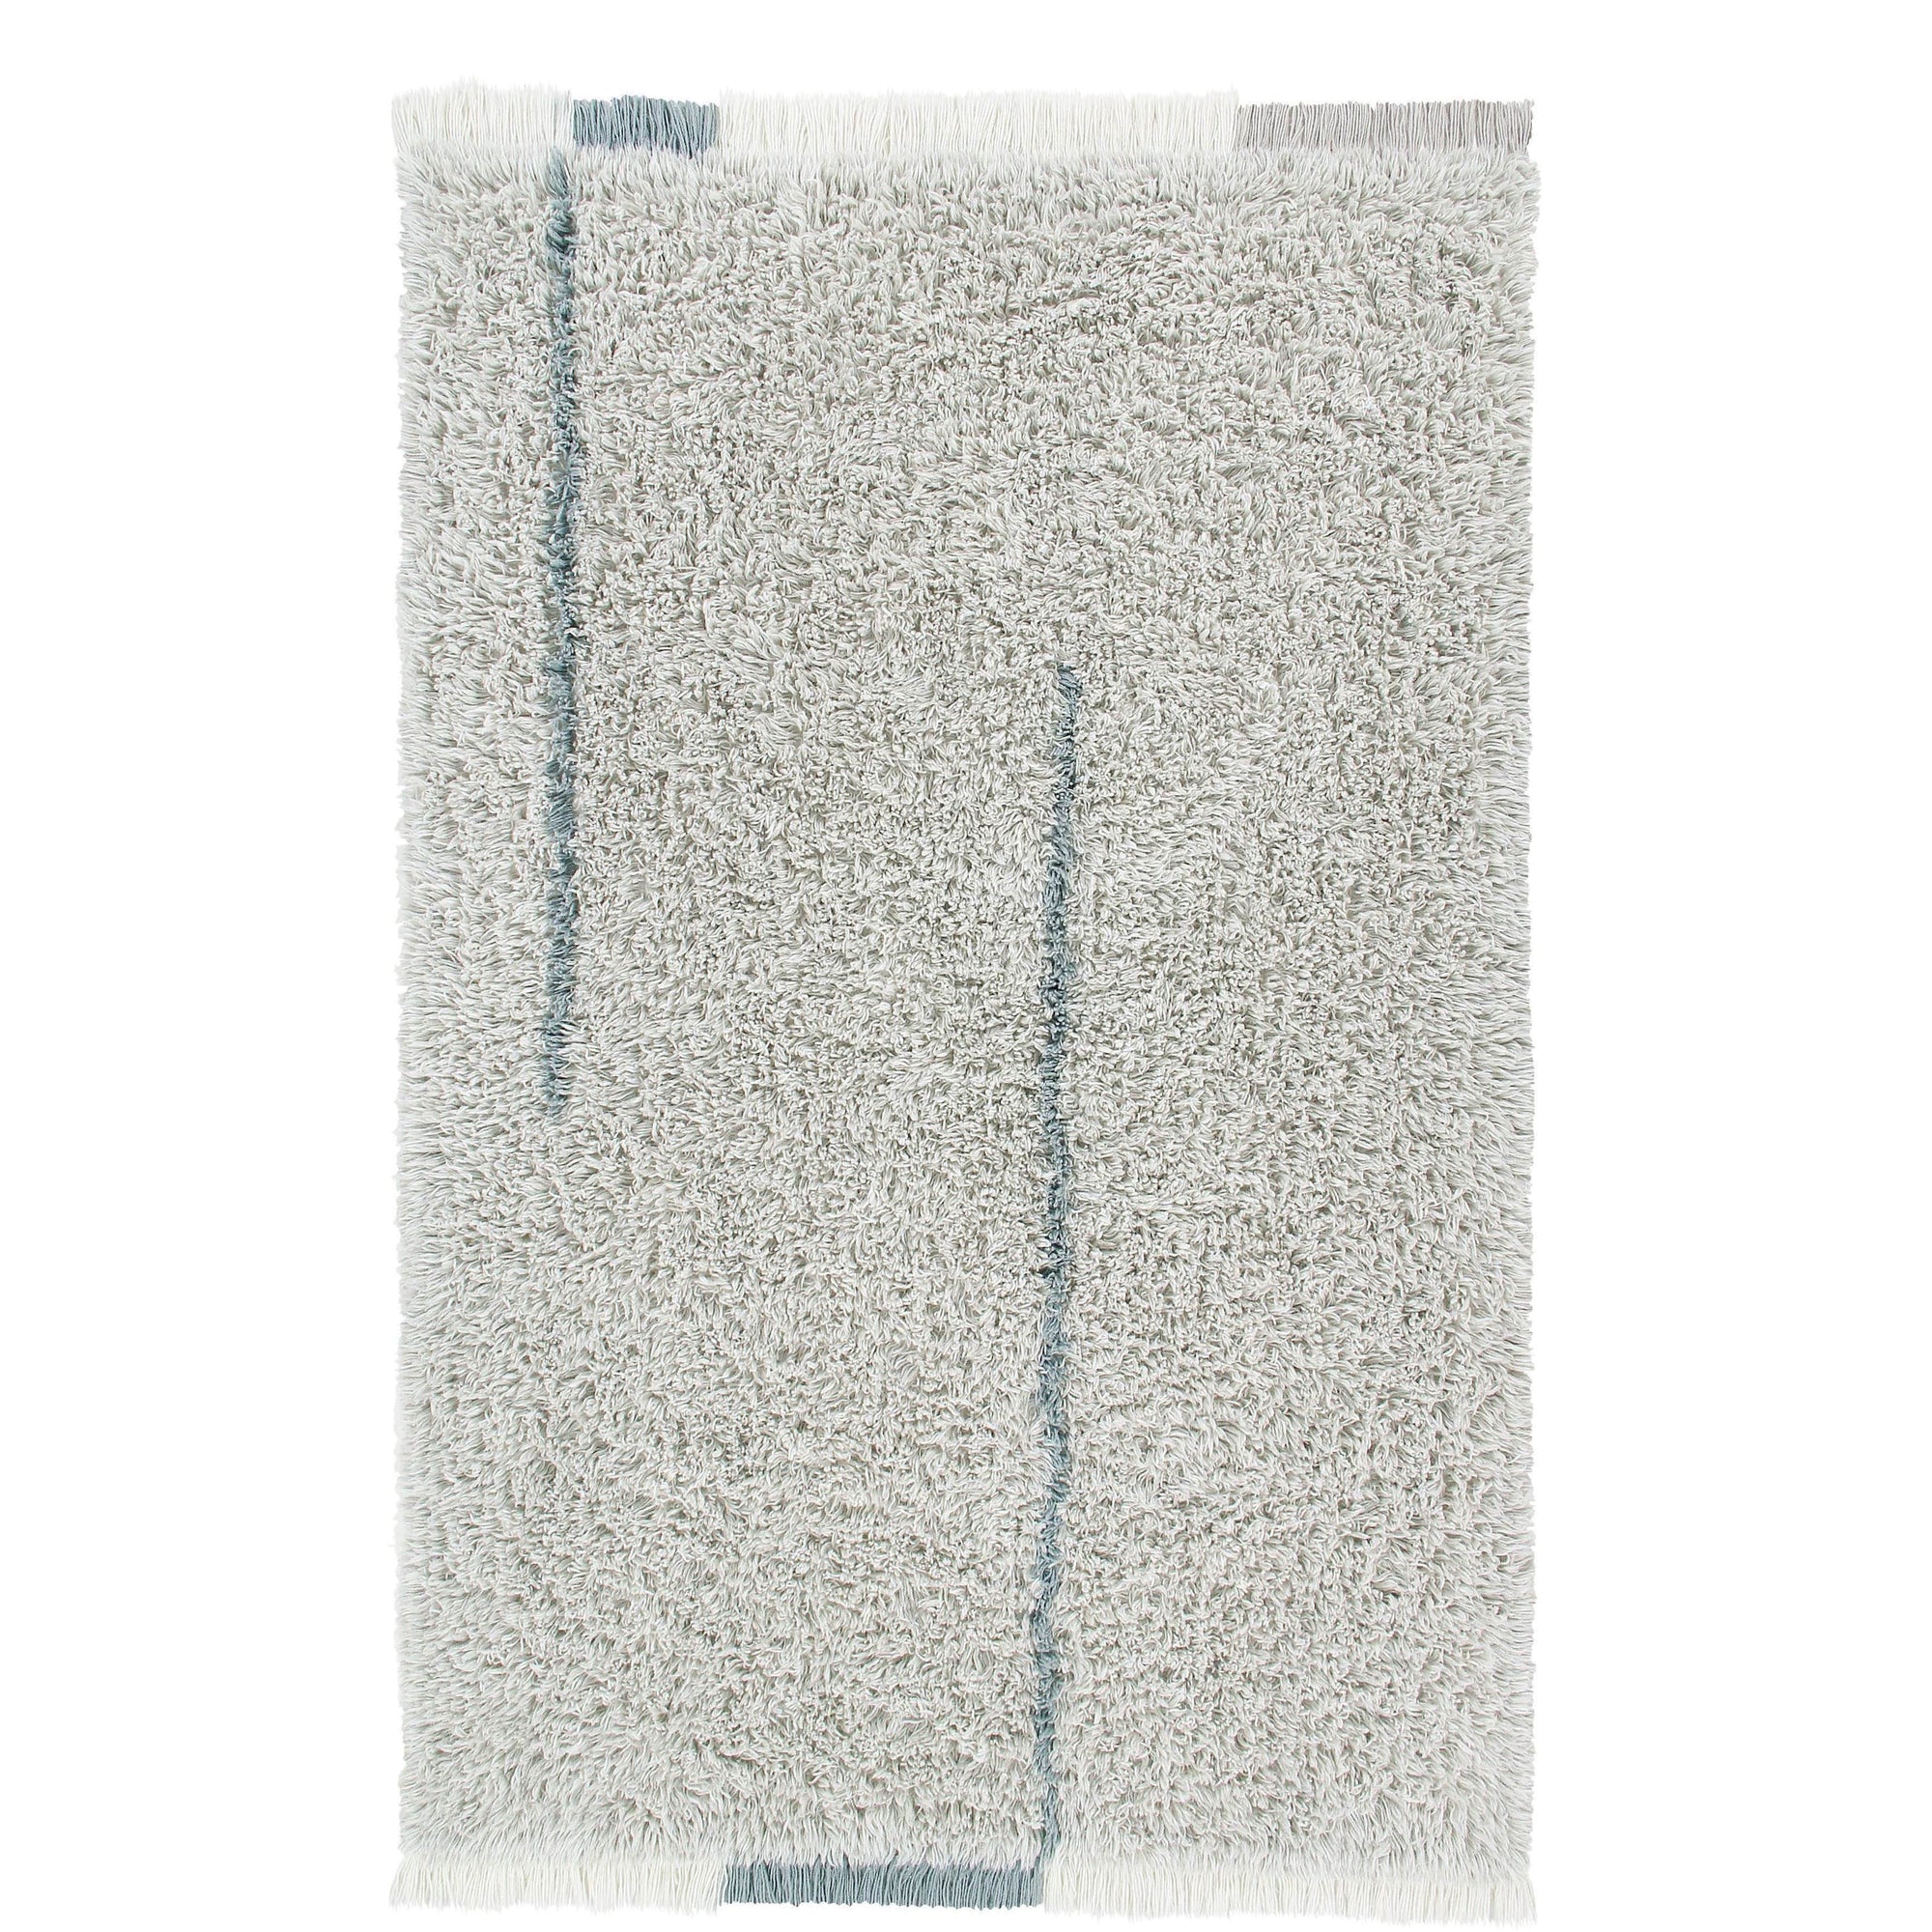 Lorena Canals Winter Calm Wool Washable Area Rug